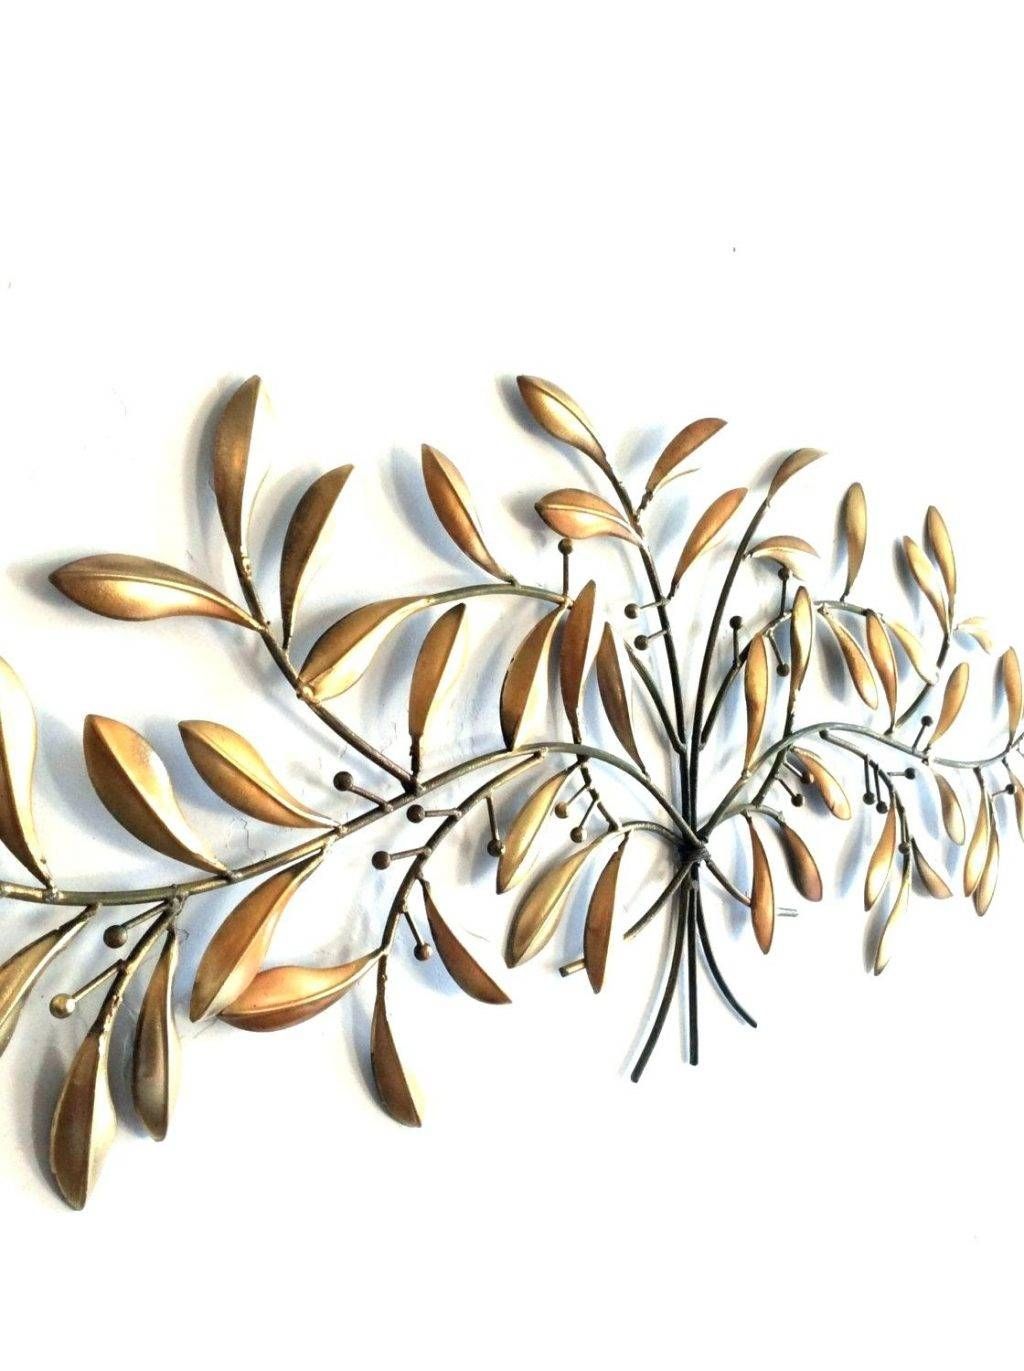 Wall Arts ~ Compact Metal Wall Art Gold Coast Large Gold Leaf Wall Inside Most Current Gold Metal Wall Art (View 15 of 20)